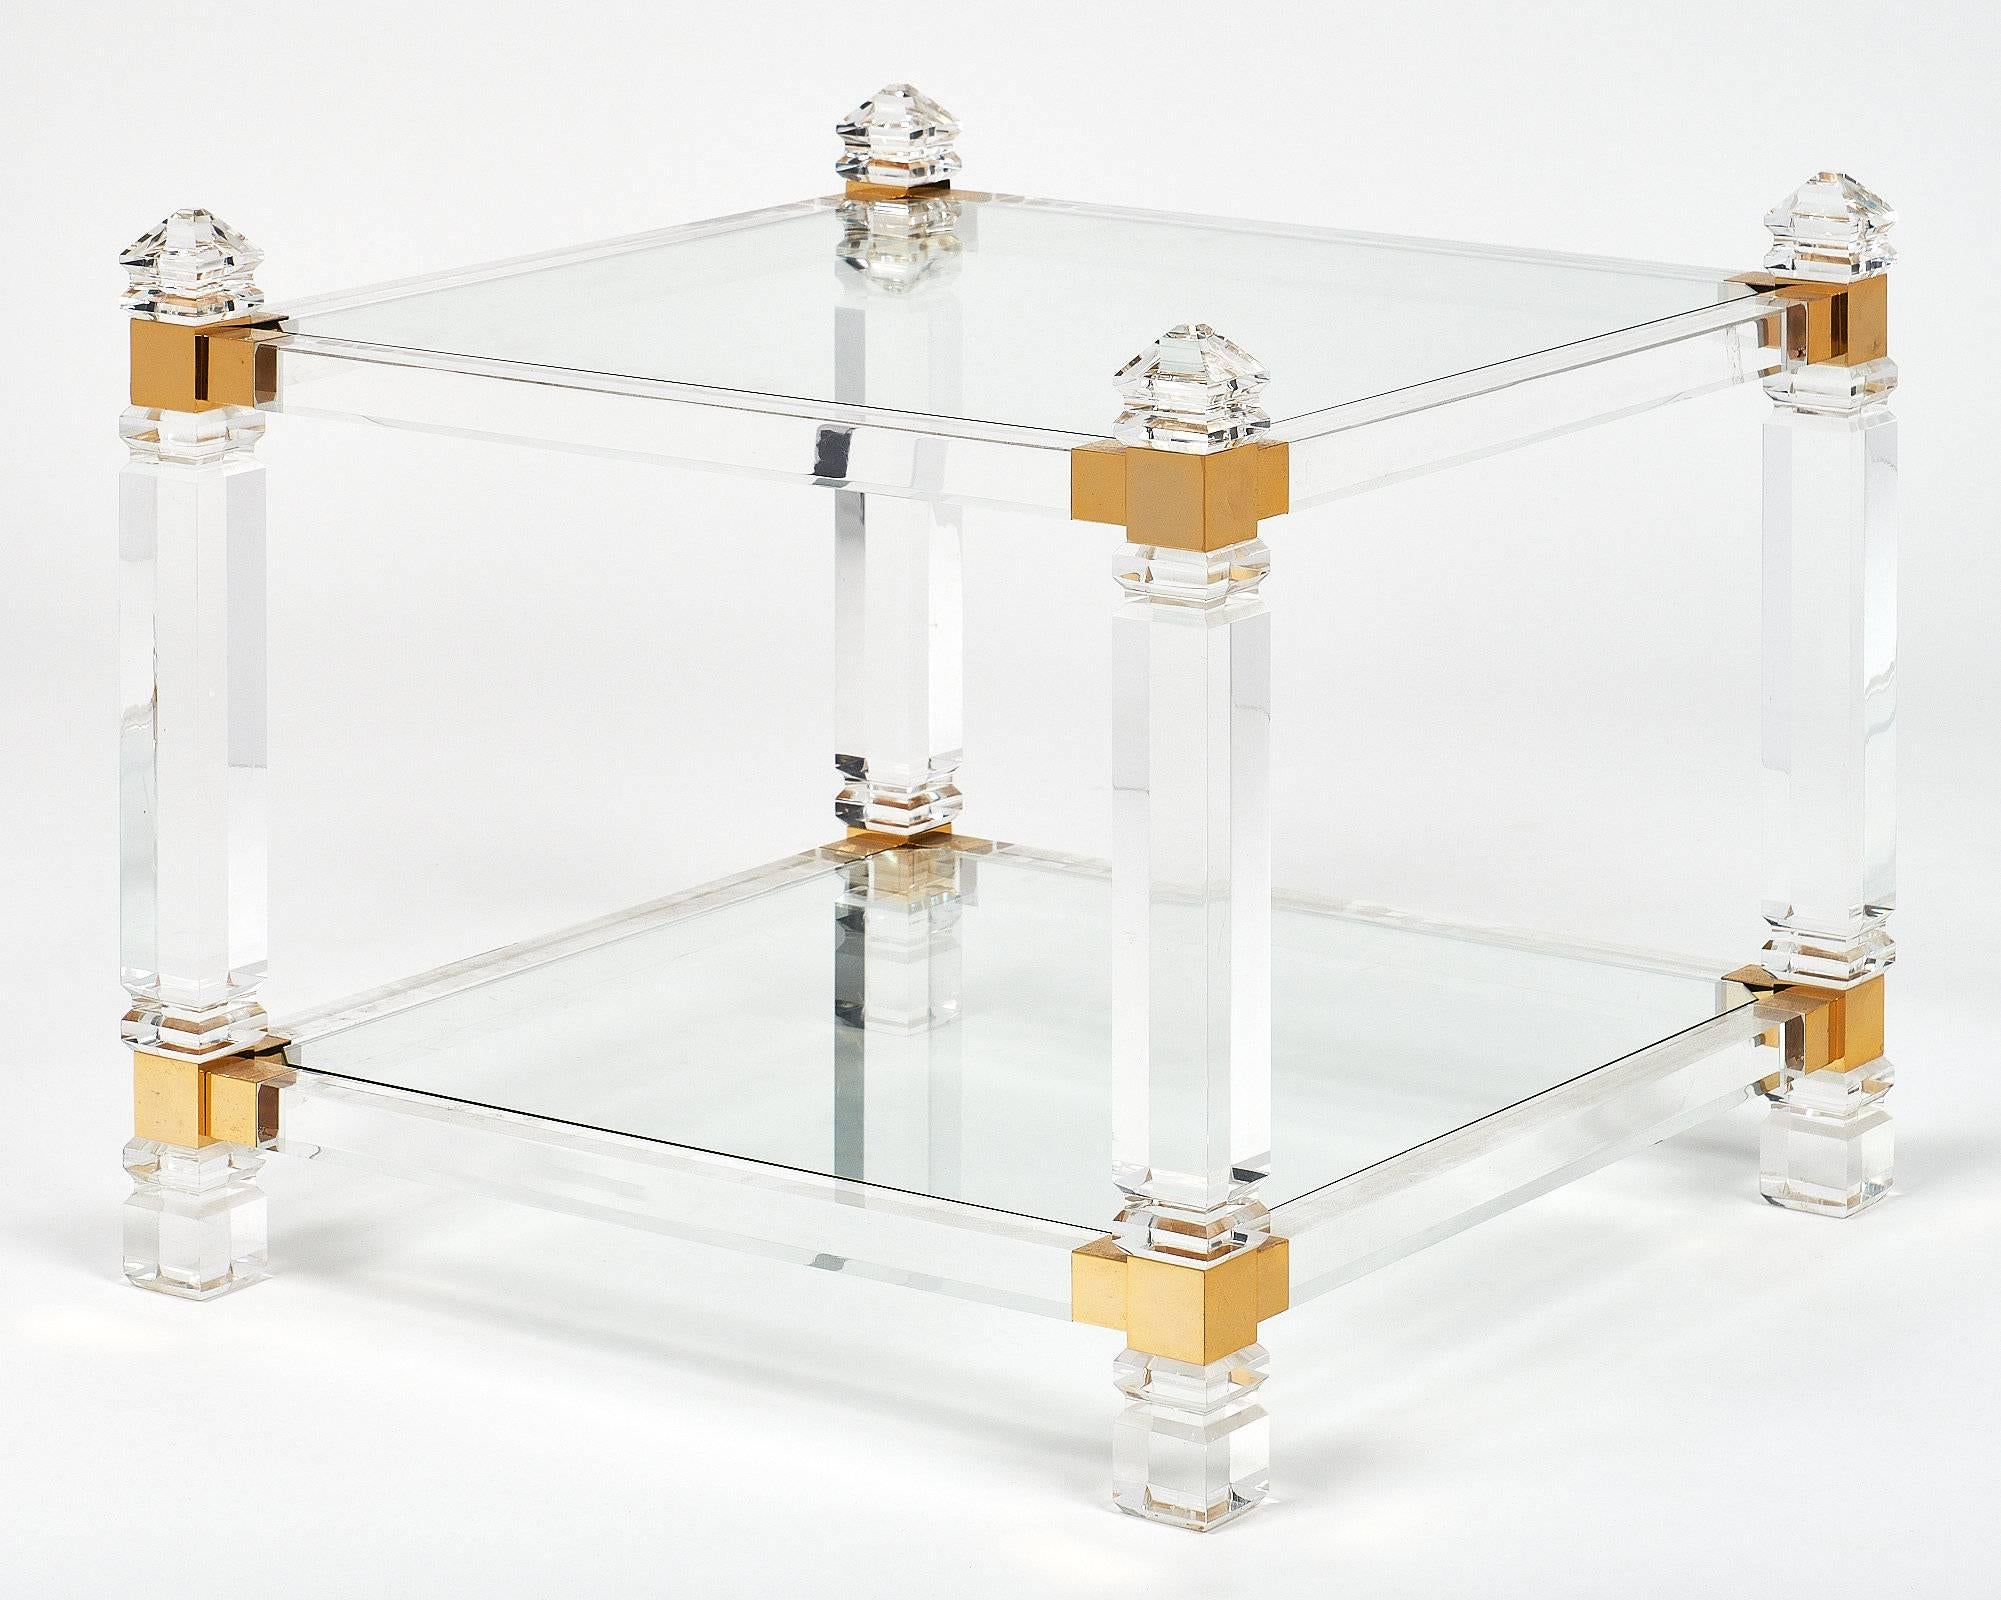 French Modernist Lucite and brass side tables. This pair is elegant and bold! The perfect side tables, or could be presented side by side as a coffee table as well. We loved the rich complex structures playing with angles, transparency and light.